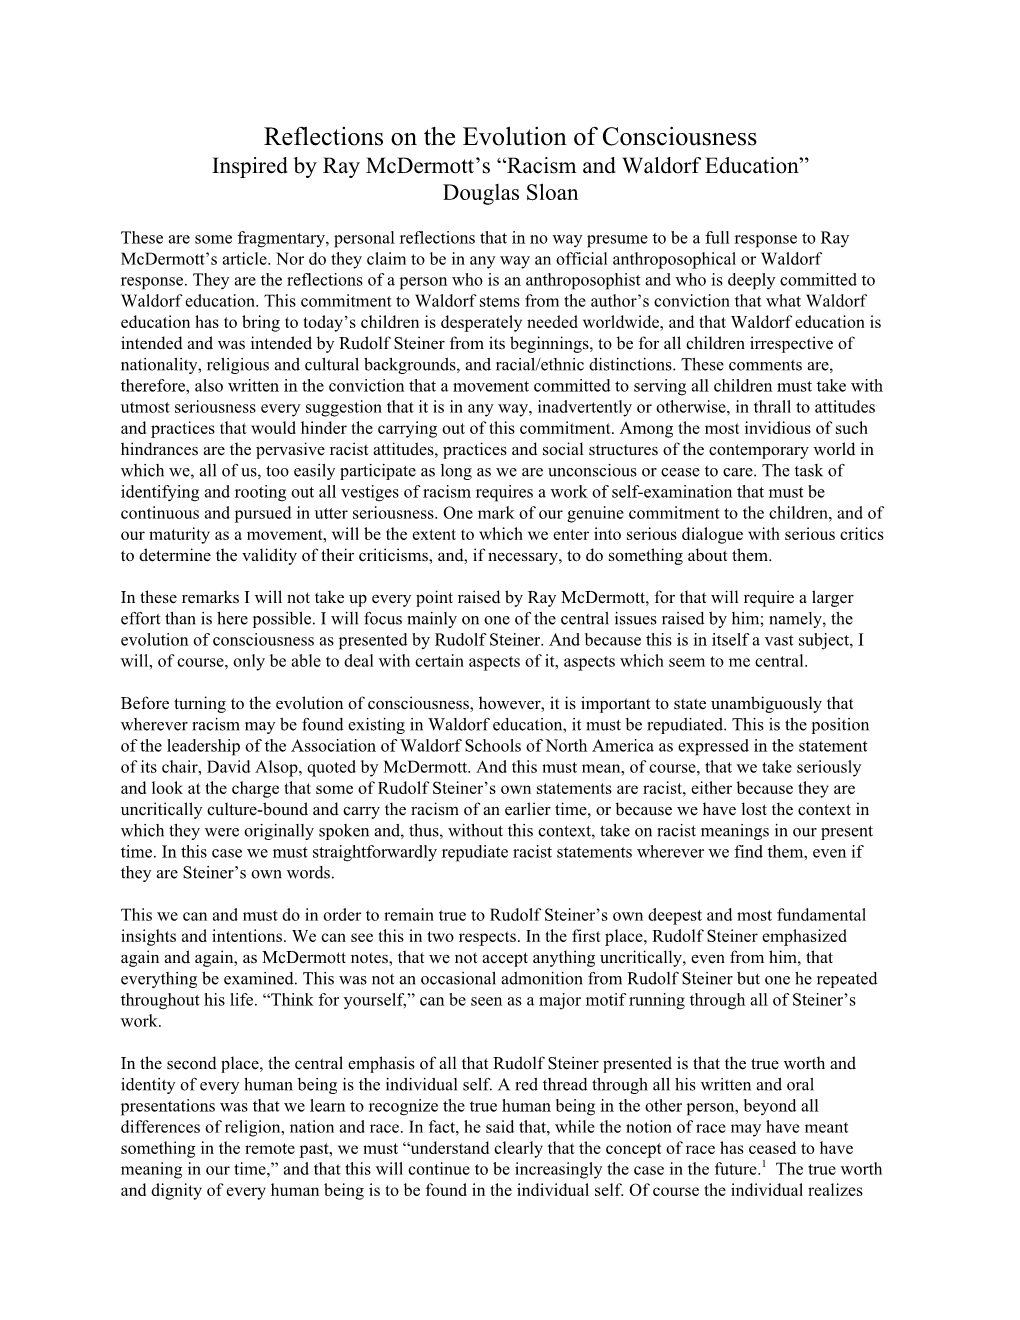 Reflections on the Evolution of Consciousness Inspired by Ray Mcdermott’S “Racism and Waldorf Education” Douglas Sloan